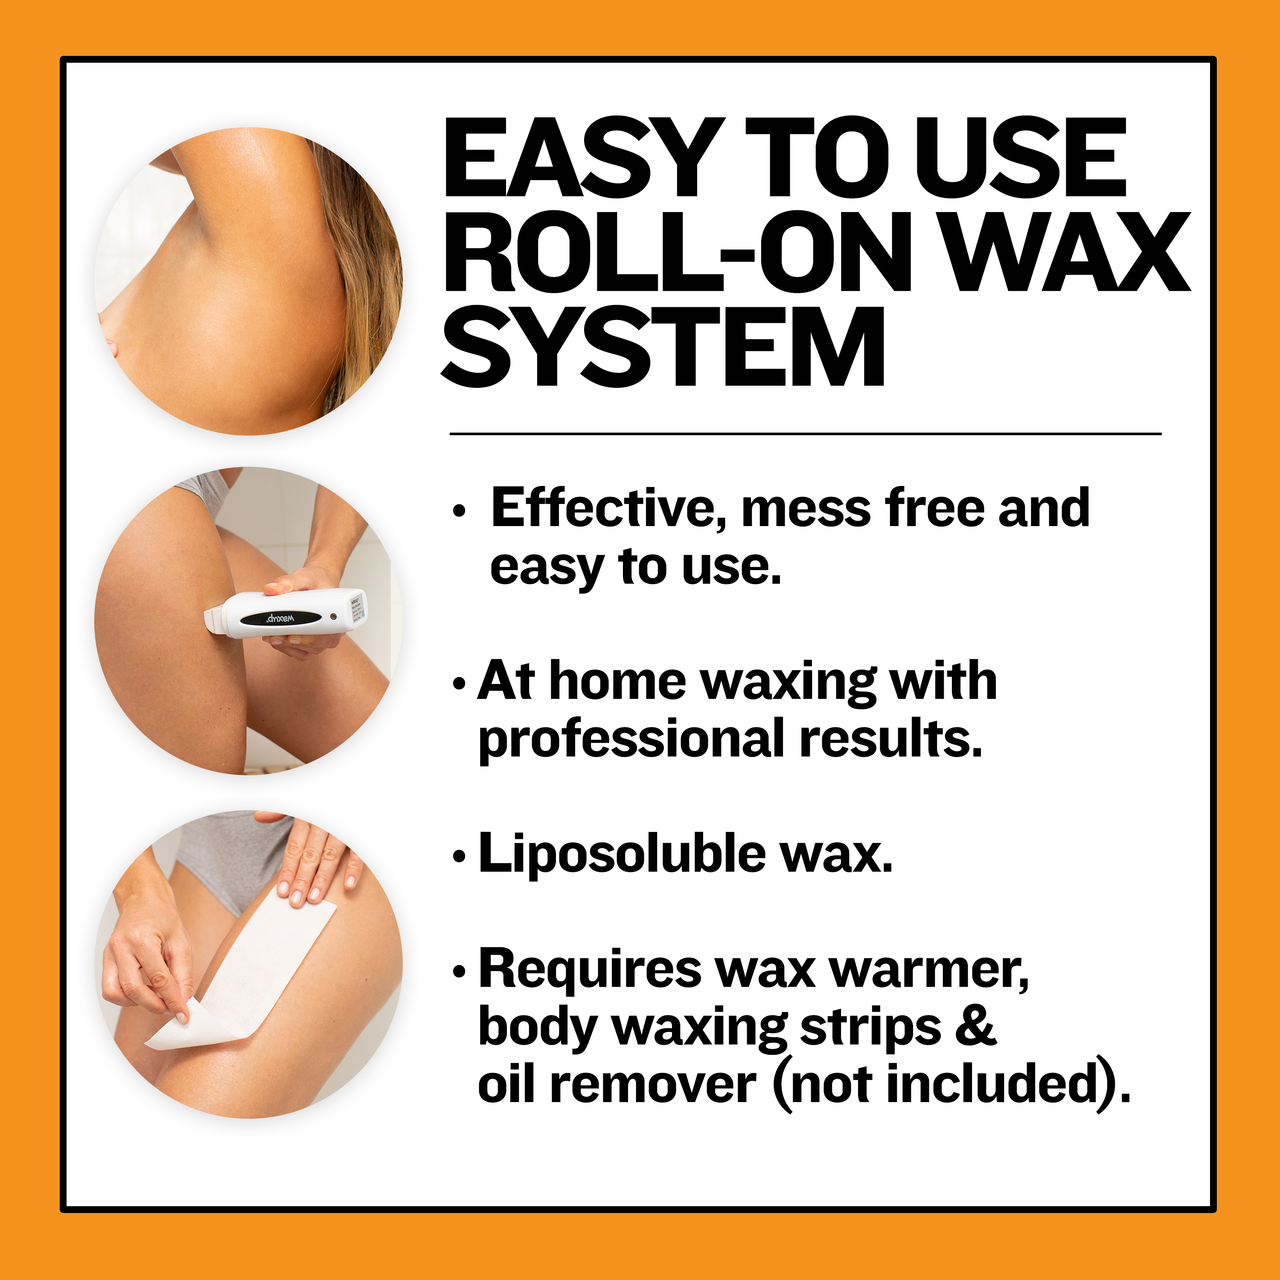 Honey Roll On Wax Cartridges 2 Pack - thatswaxup -  - Roll On Wax - waxup hair removal wax body waxing kit women and men professional waxing supplies